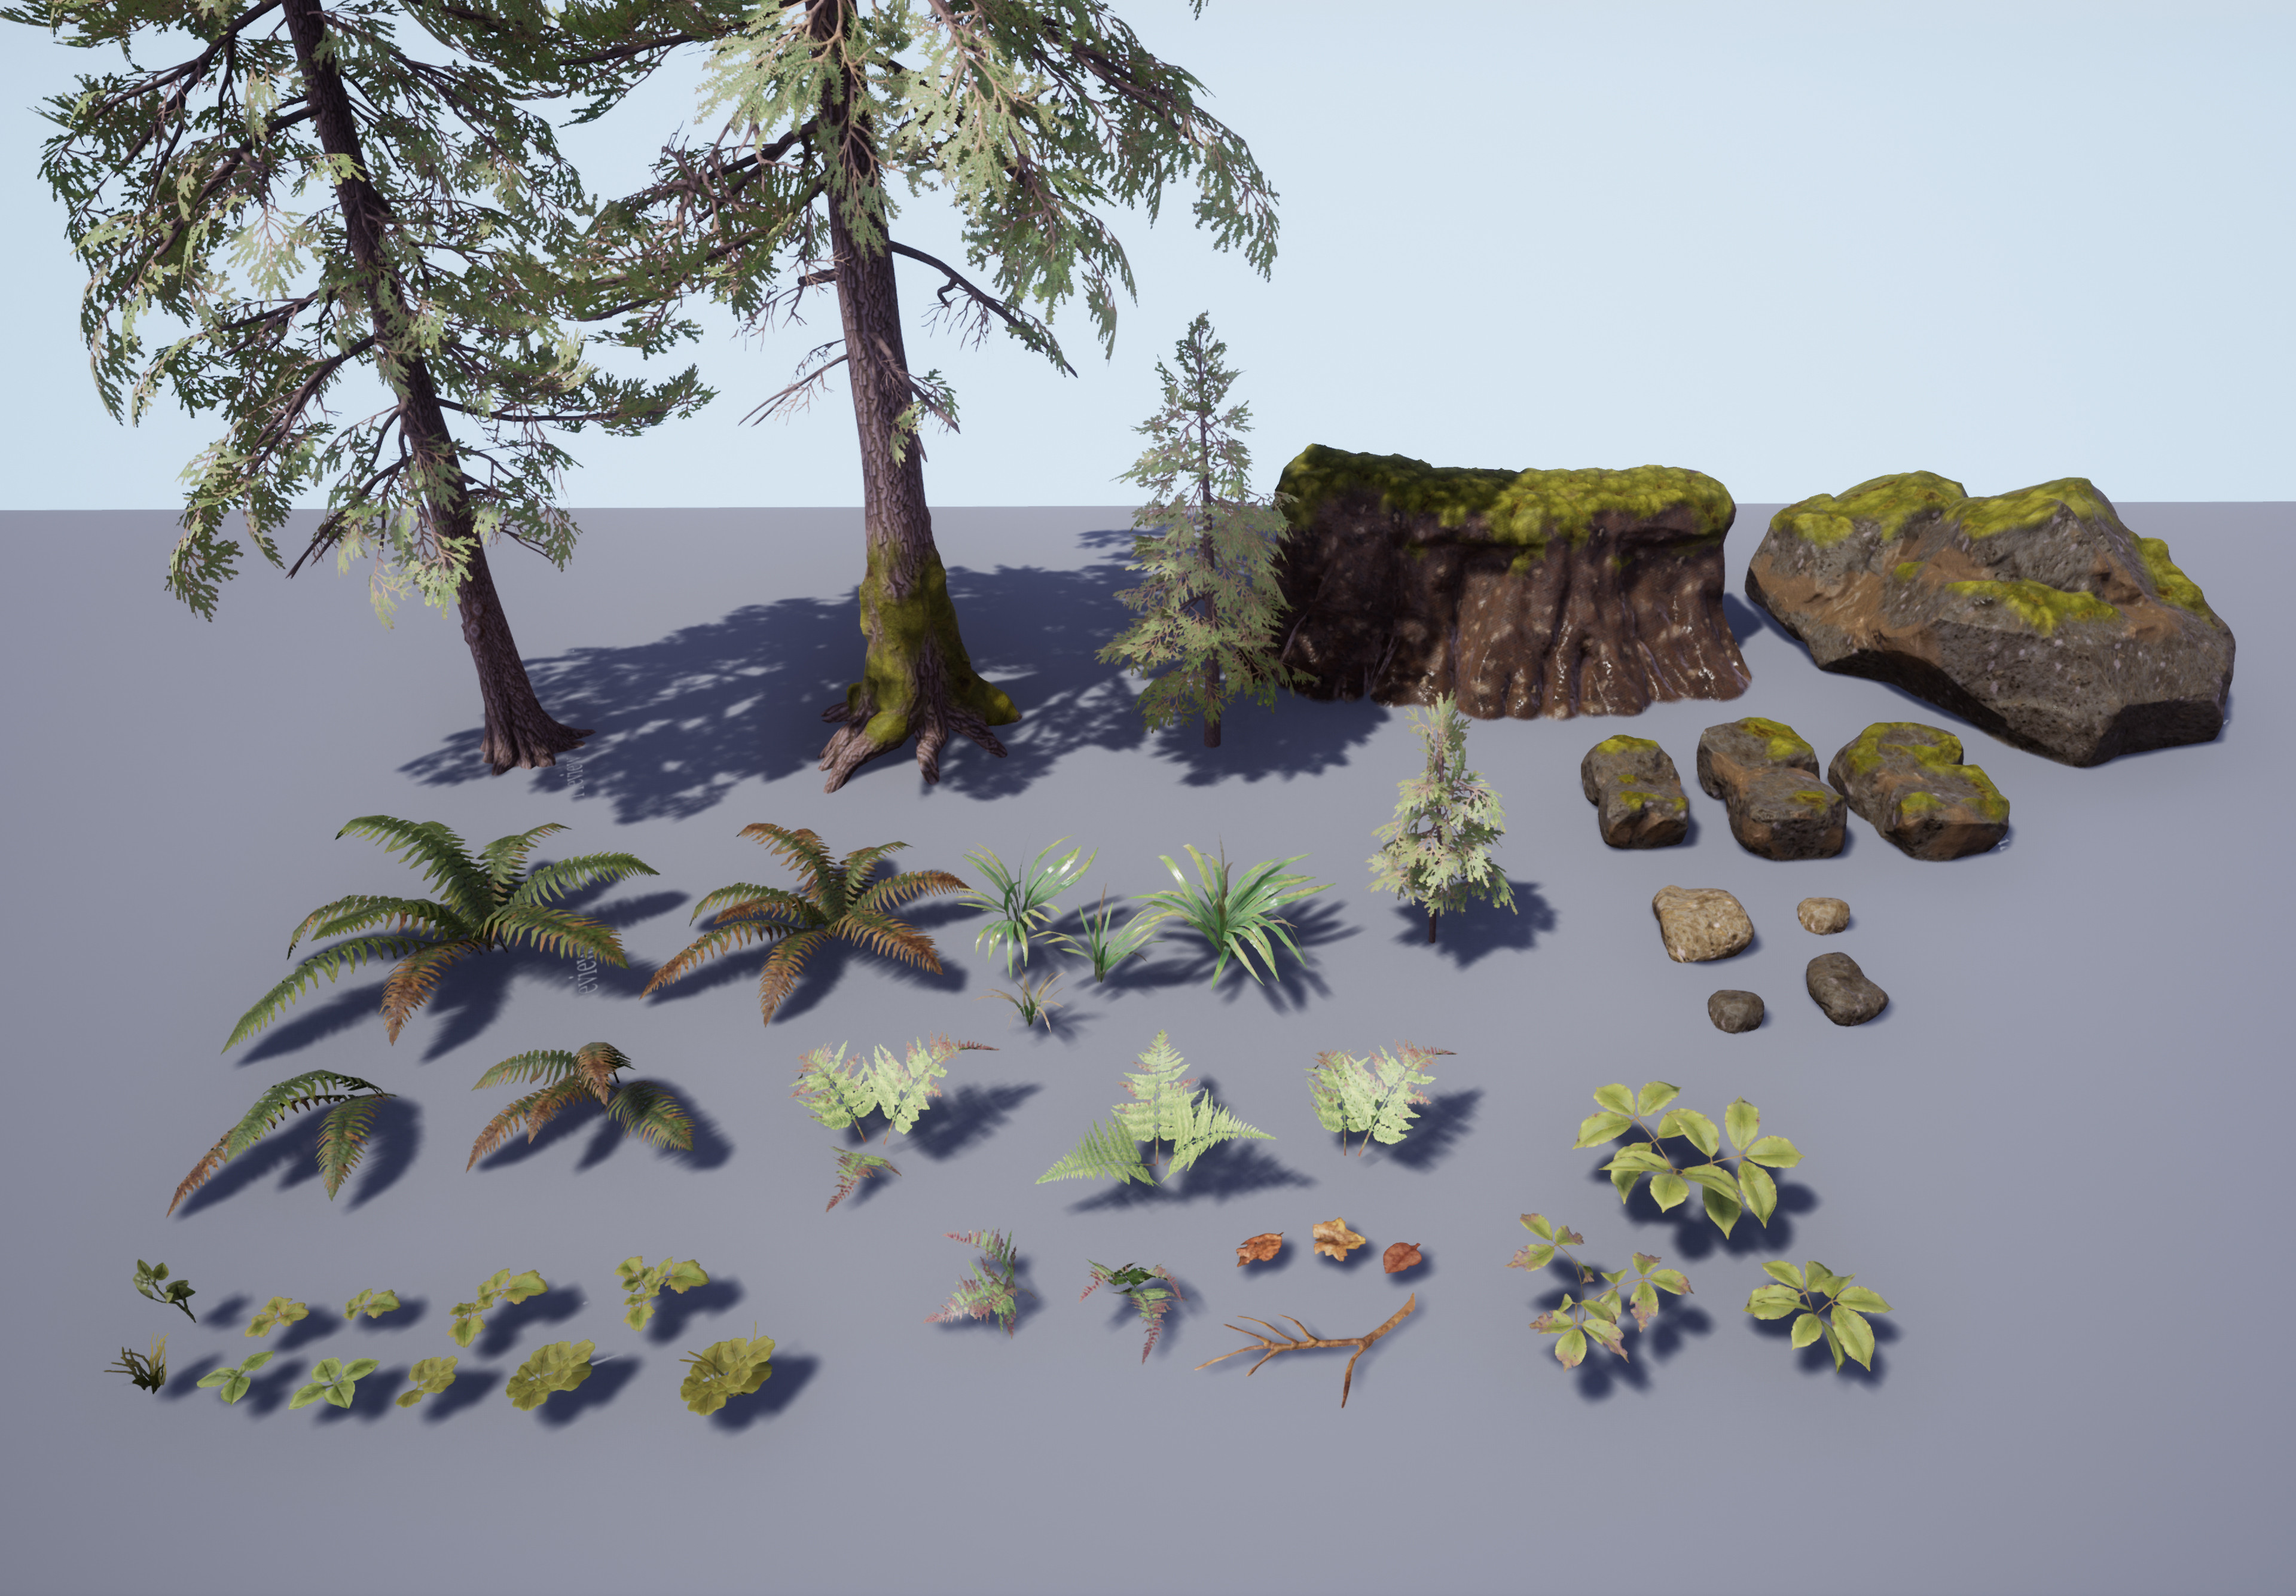 some of the assets made for the scene. they were sculpted in zbrush and modelled in maya. I used vertex blending and tiling materials on larger surfaces such as the ground, rocks, and trees.